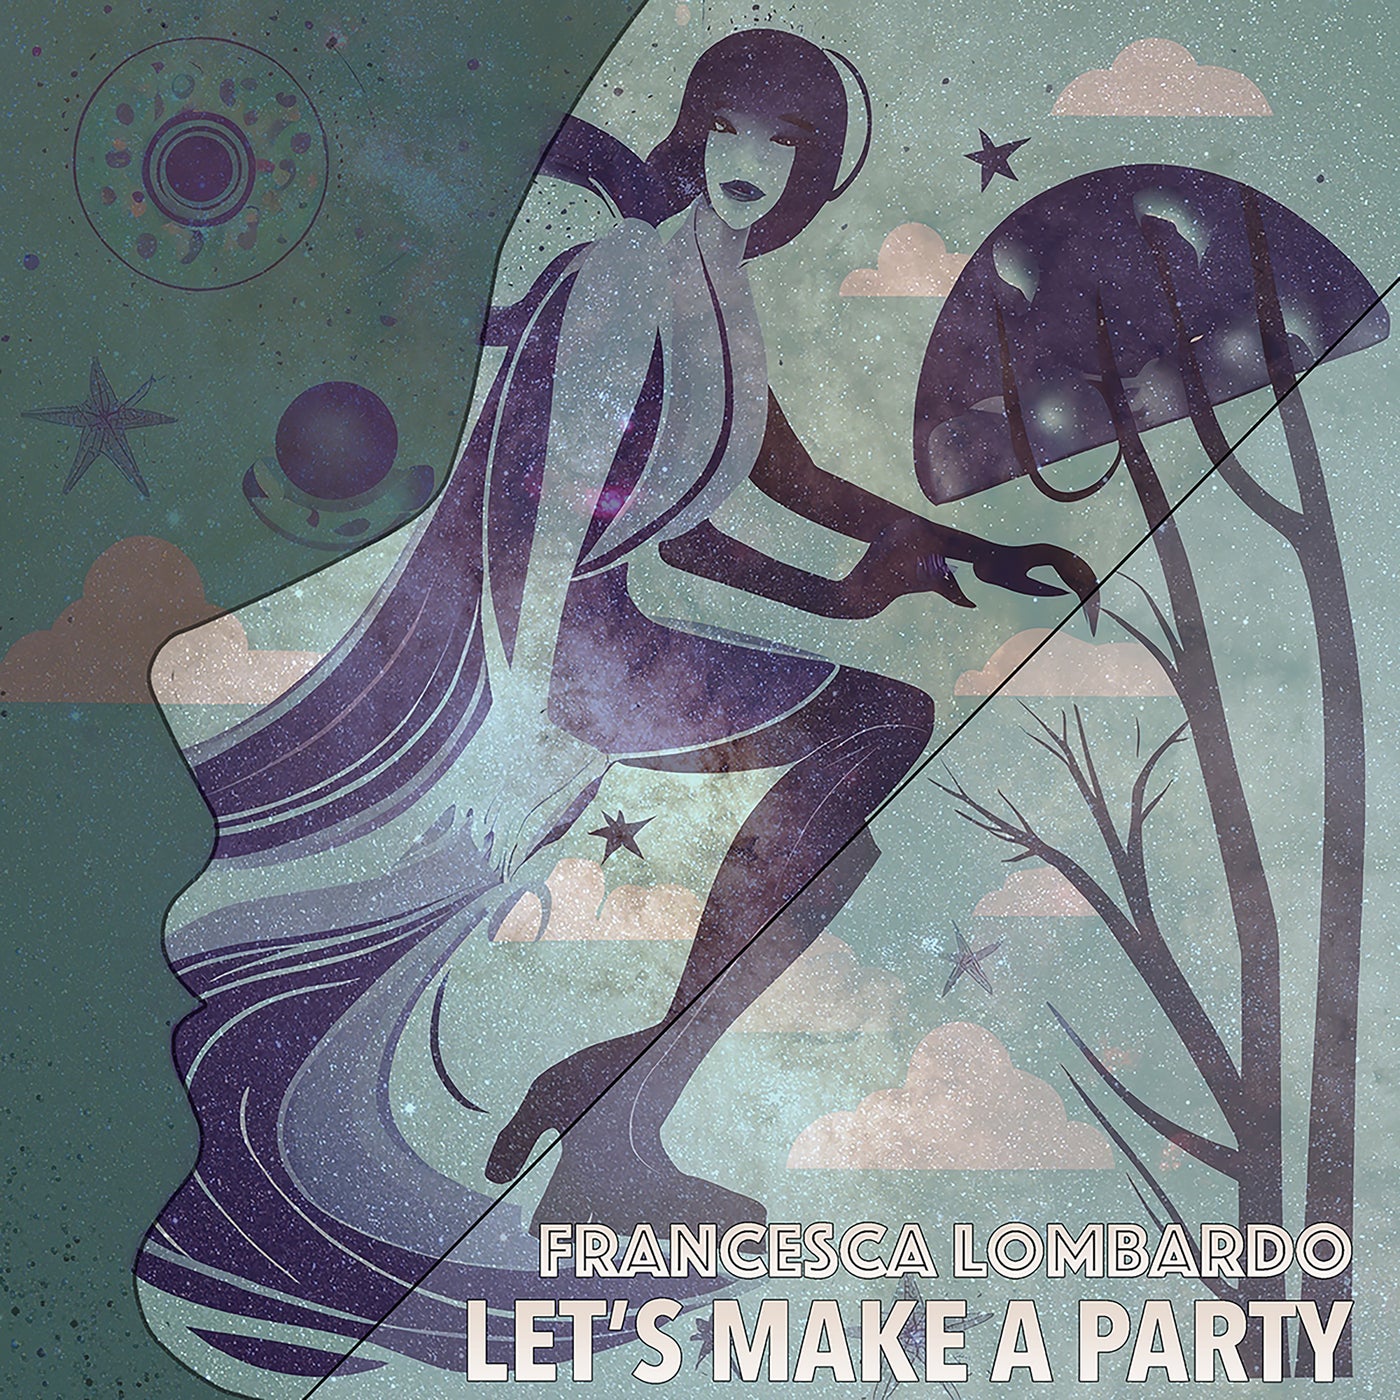 Let's Make a Party